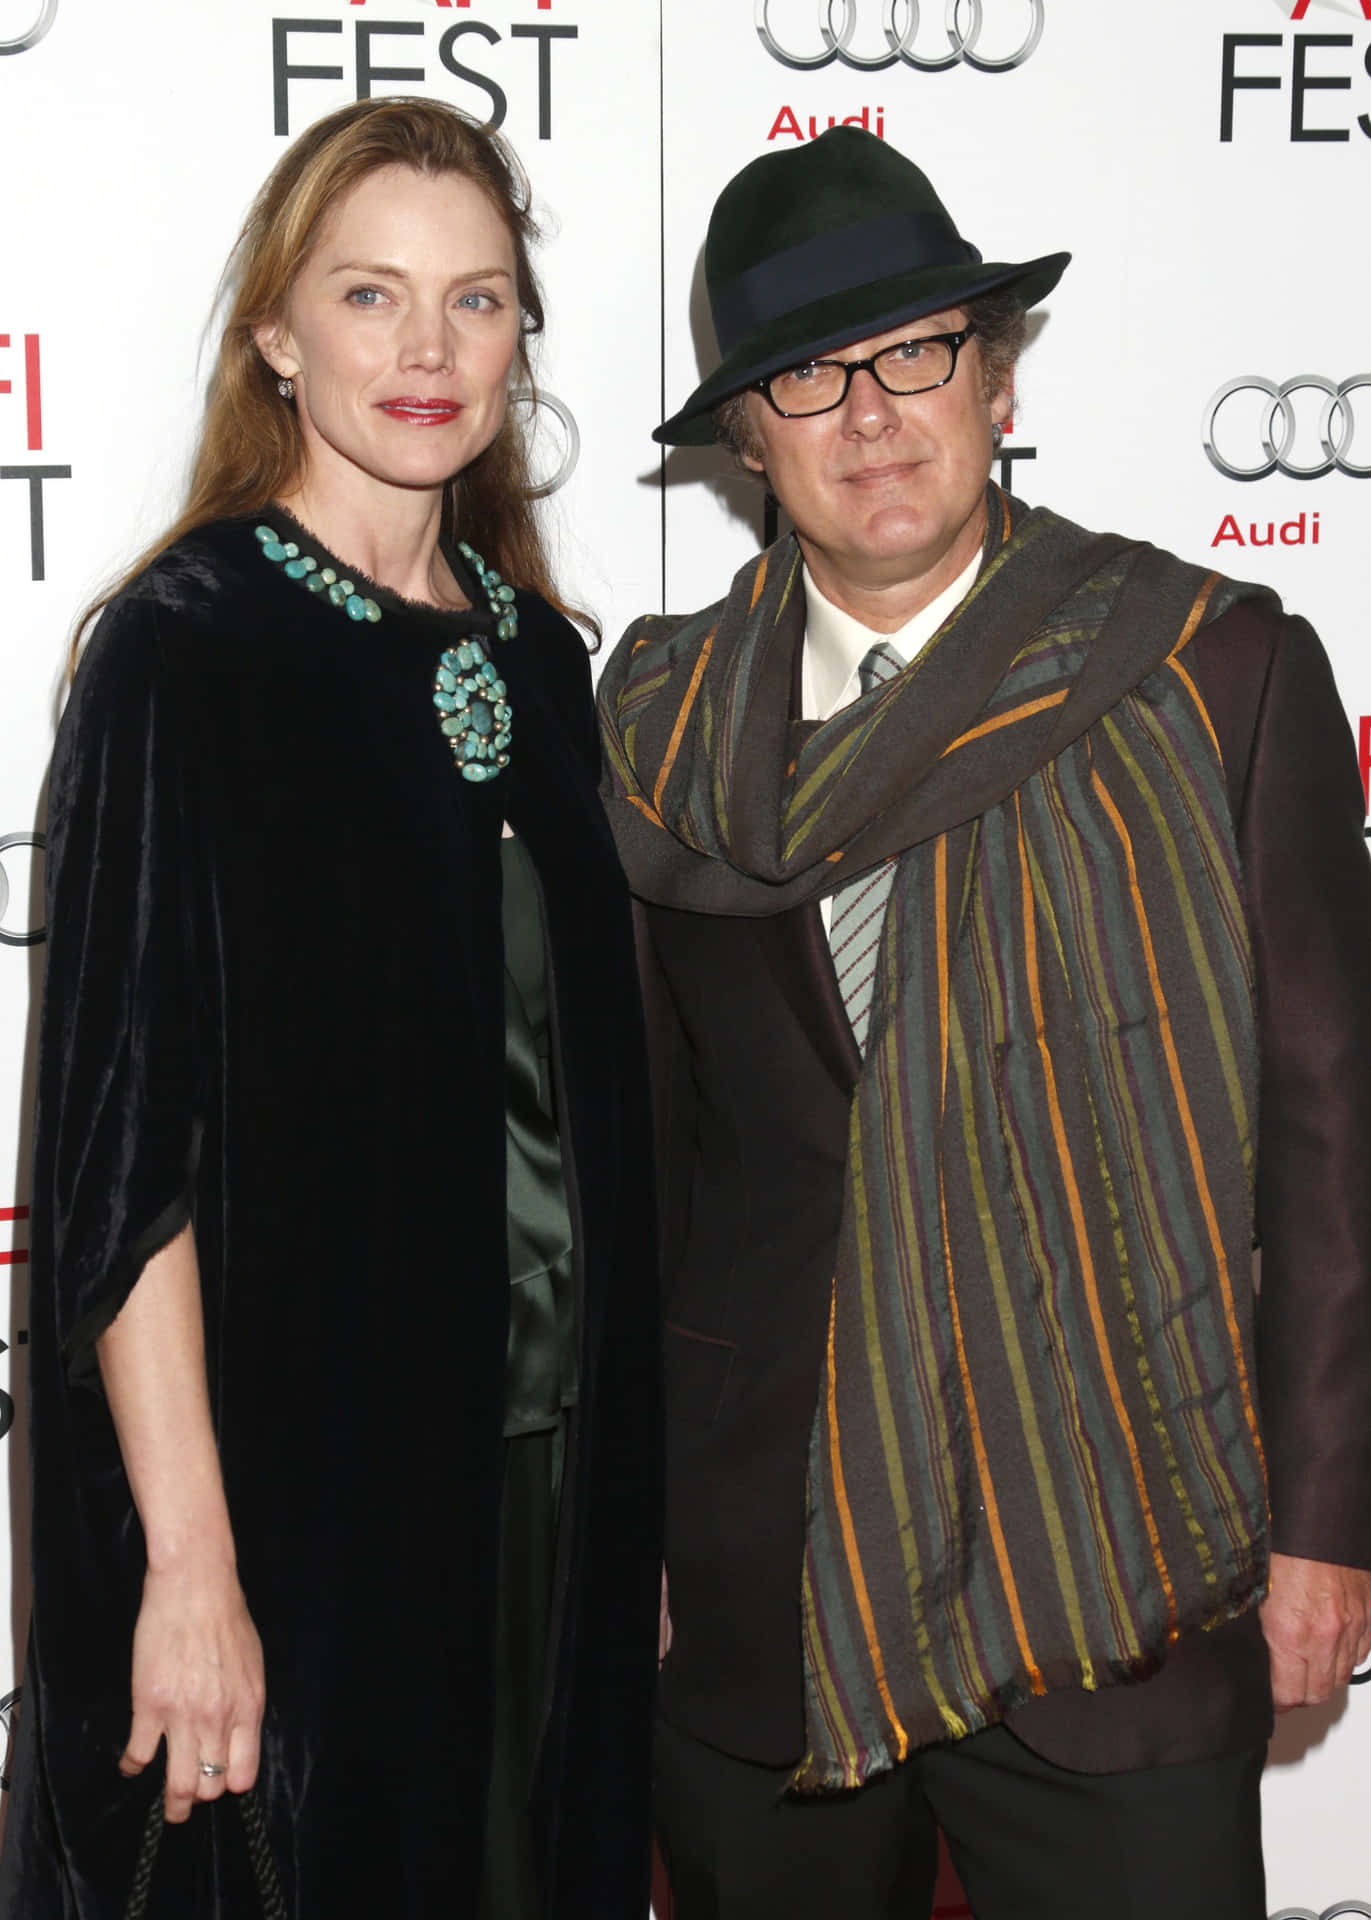 Renowned Actor James Spader At An Event Background